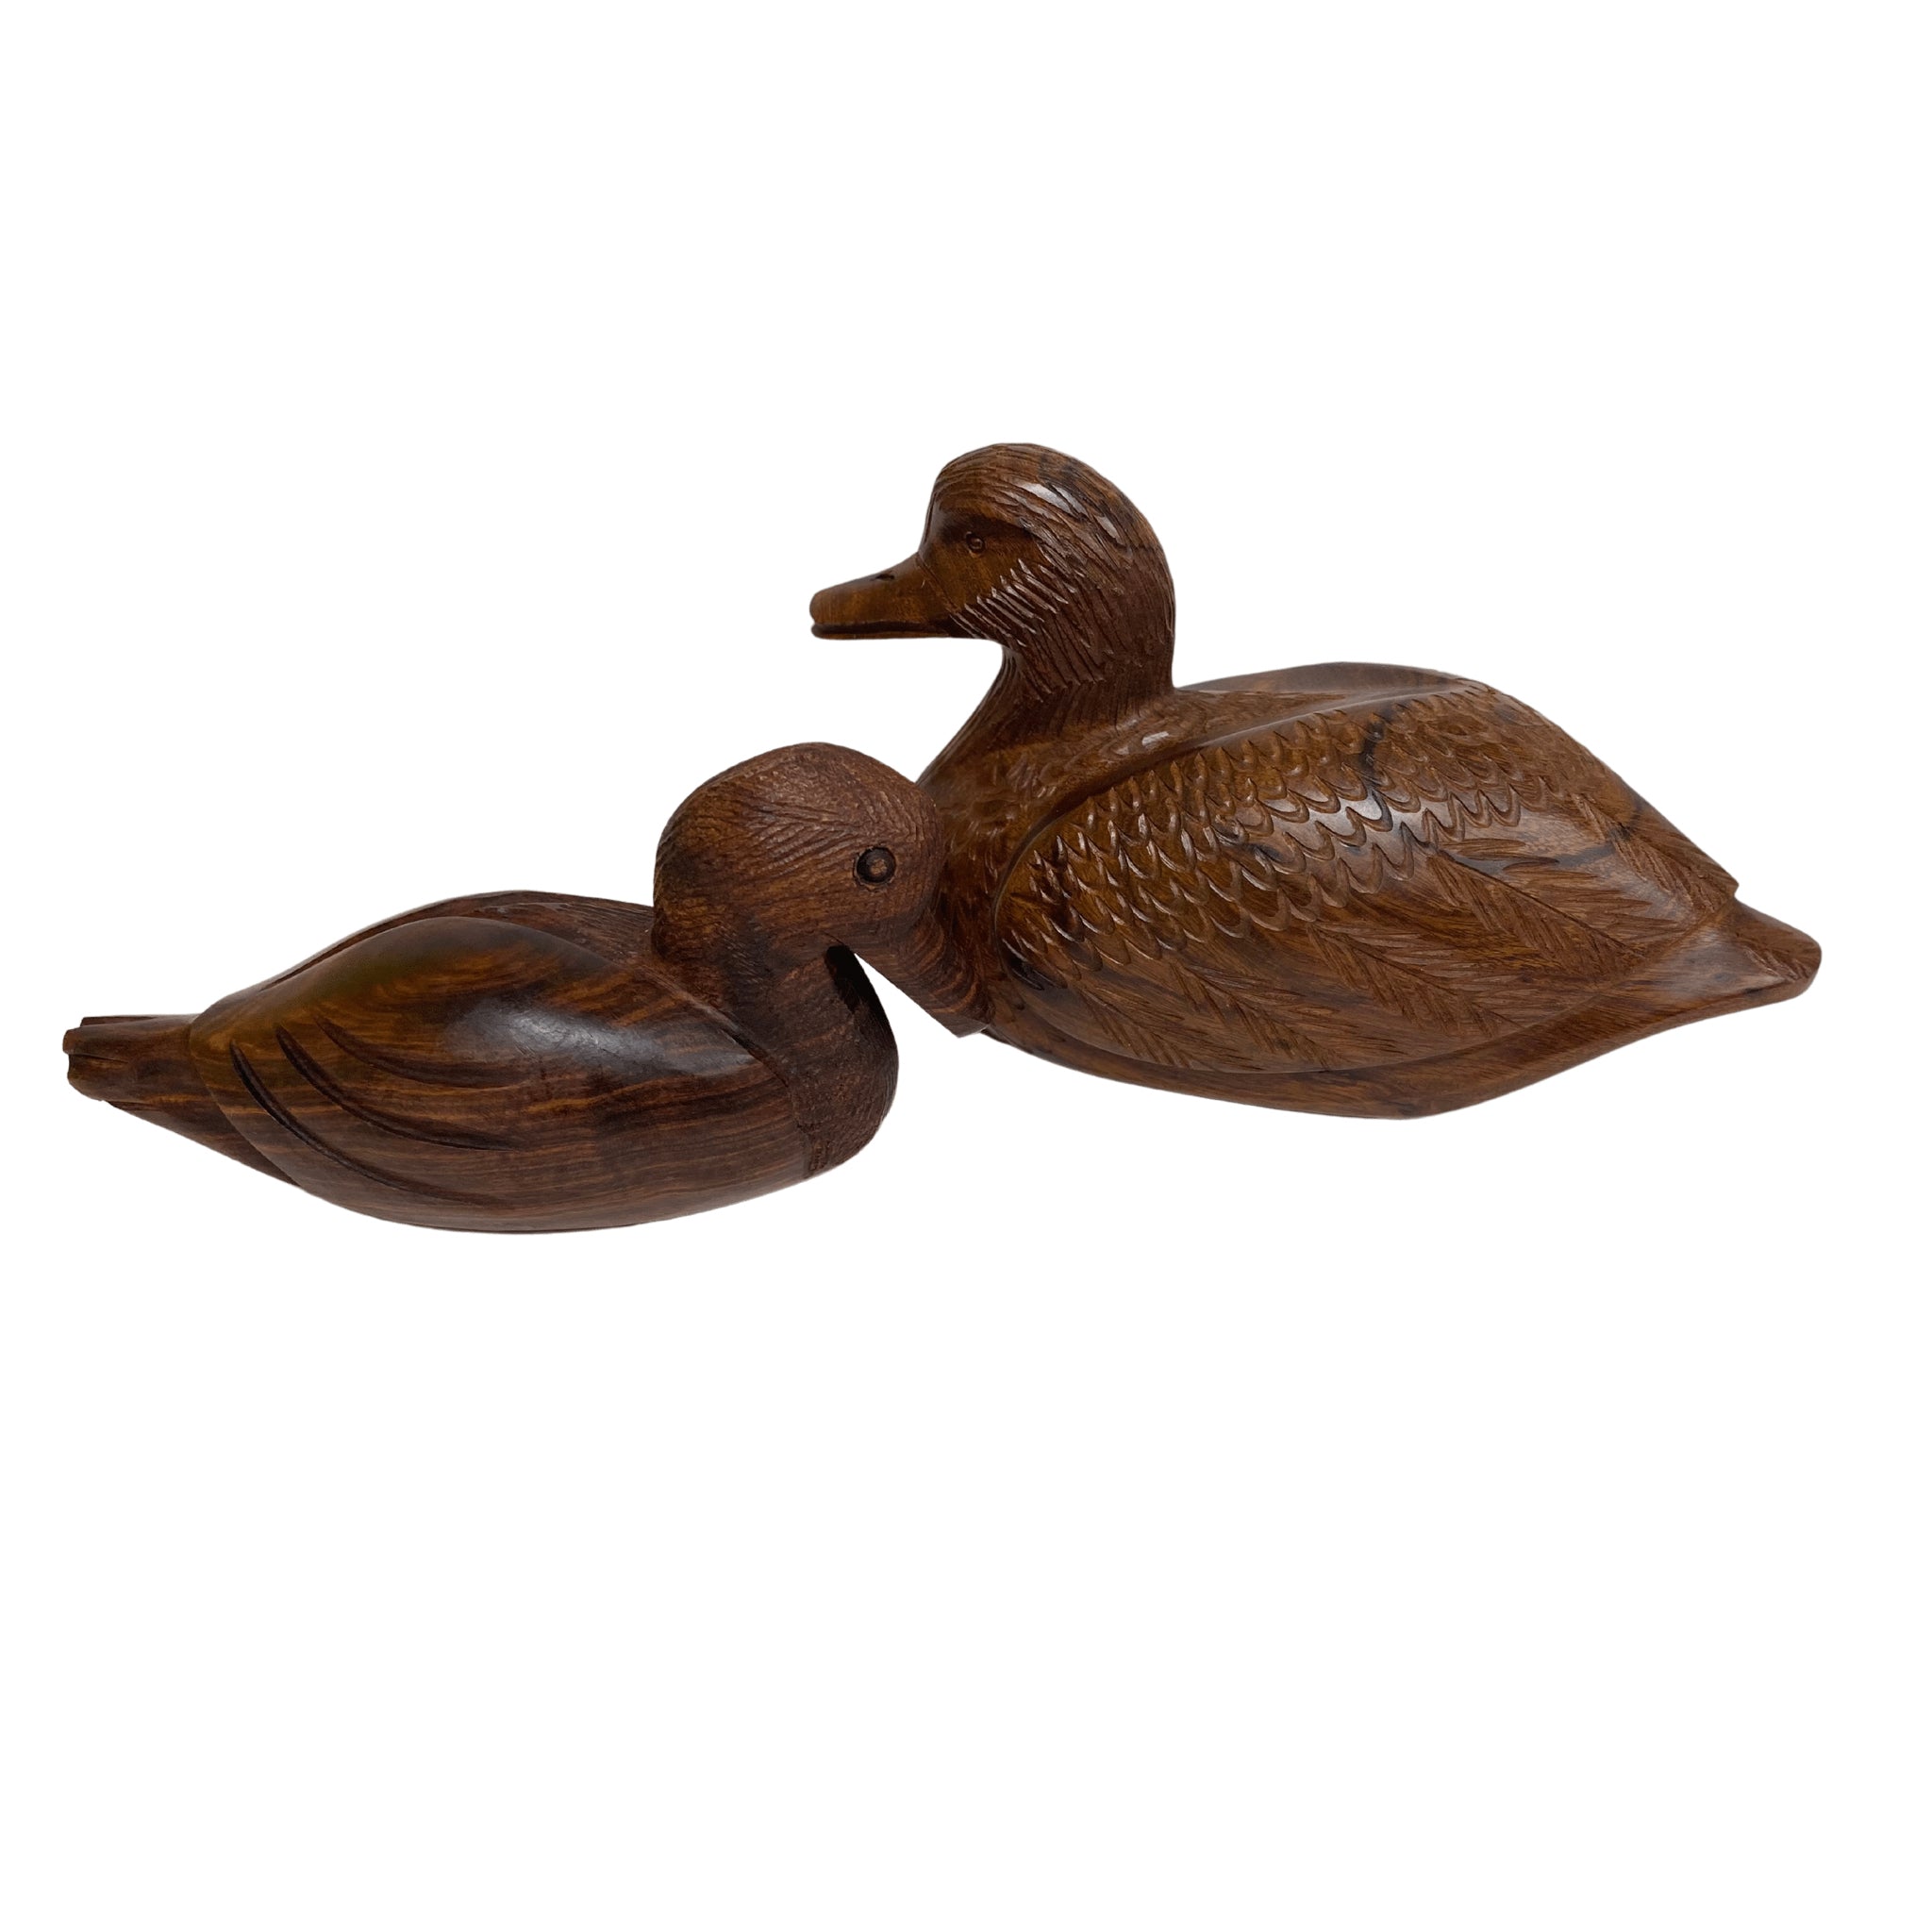 Ironwood Duck Figurine Wood Carving from Mexico